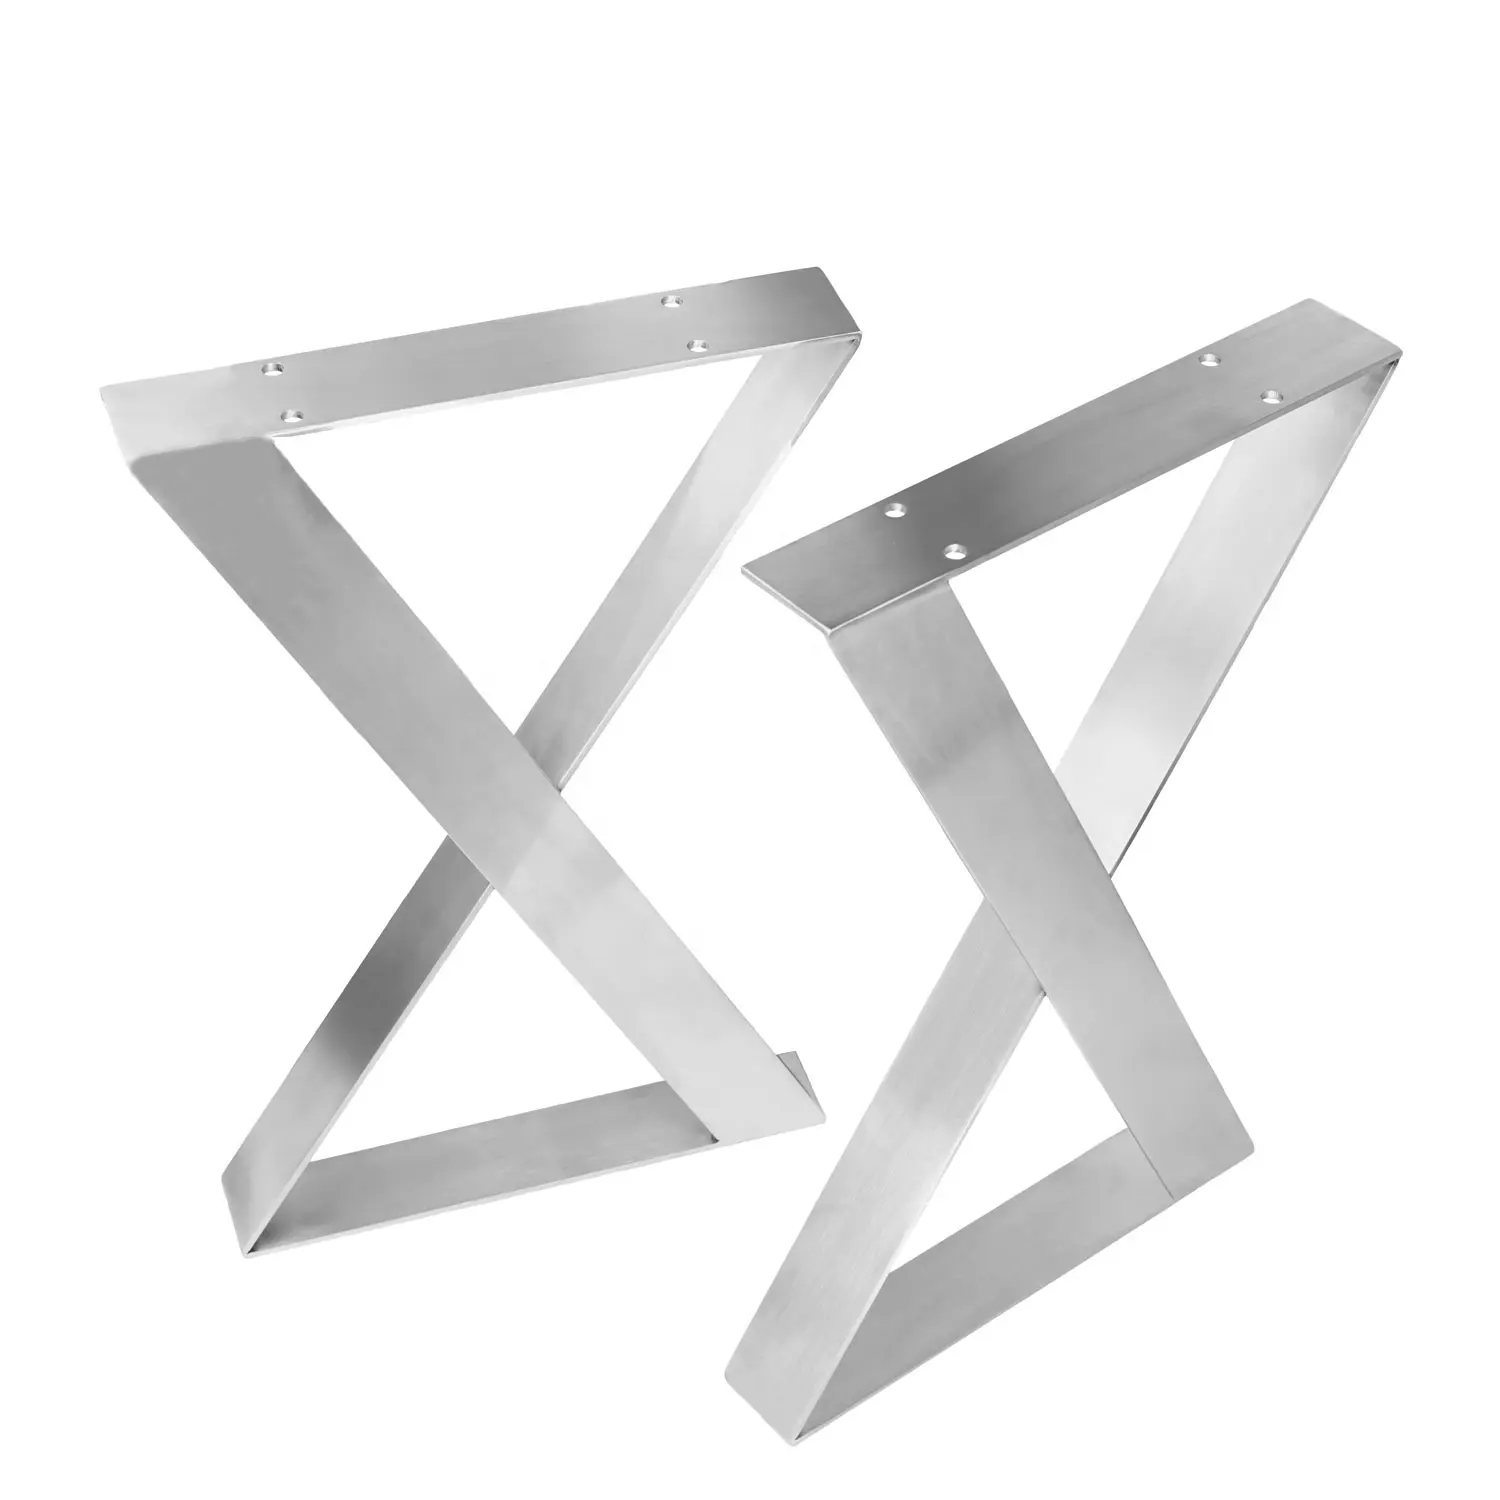 Stainless steel X table leg Custom Industrial X Shaped Furniture Table Base Metal Stainless steel Table Legs